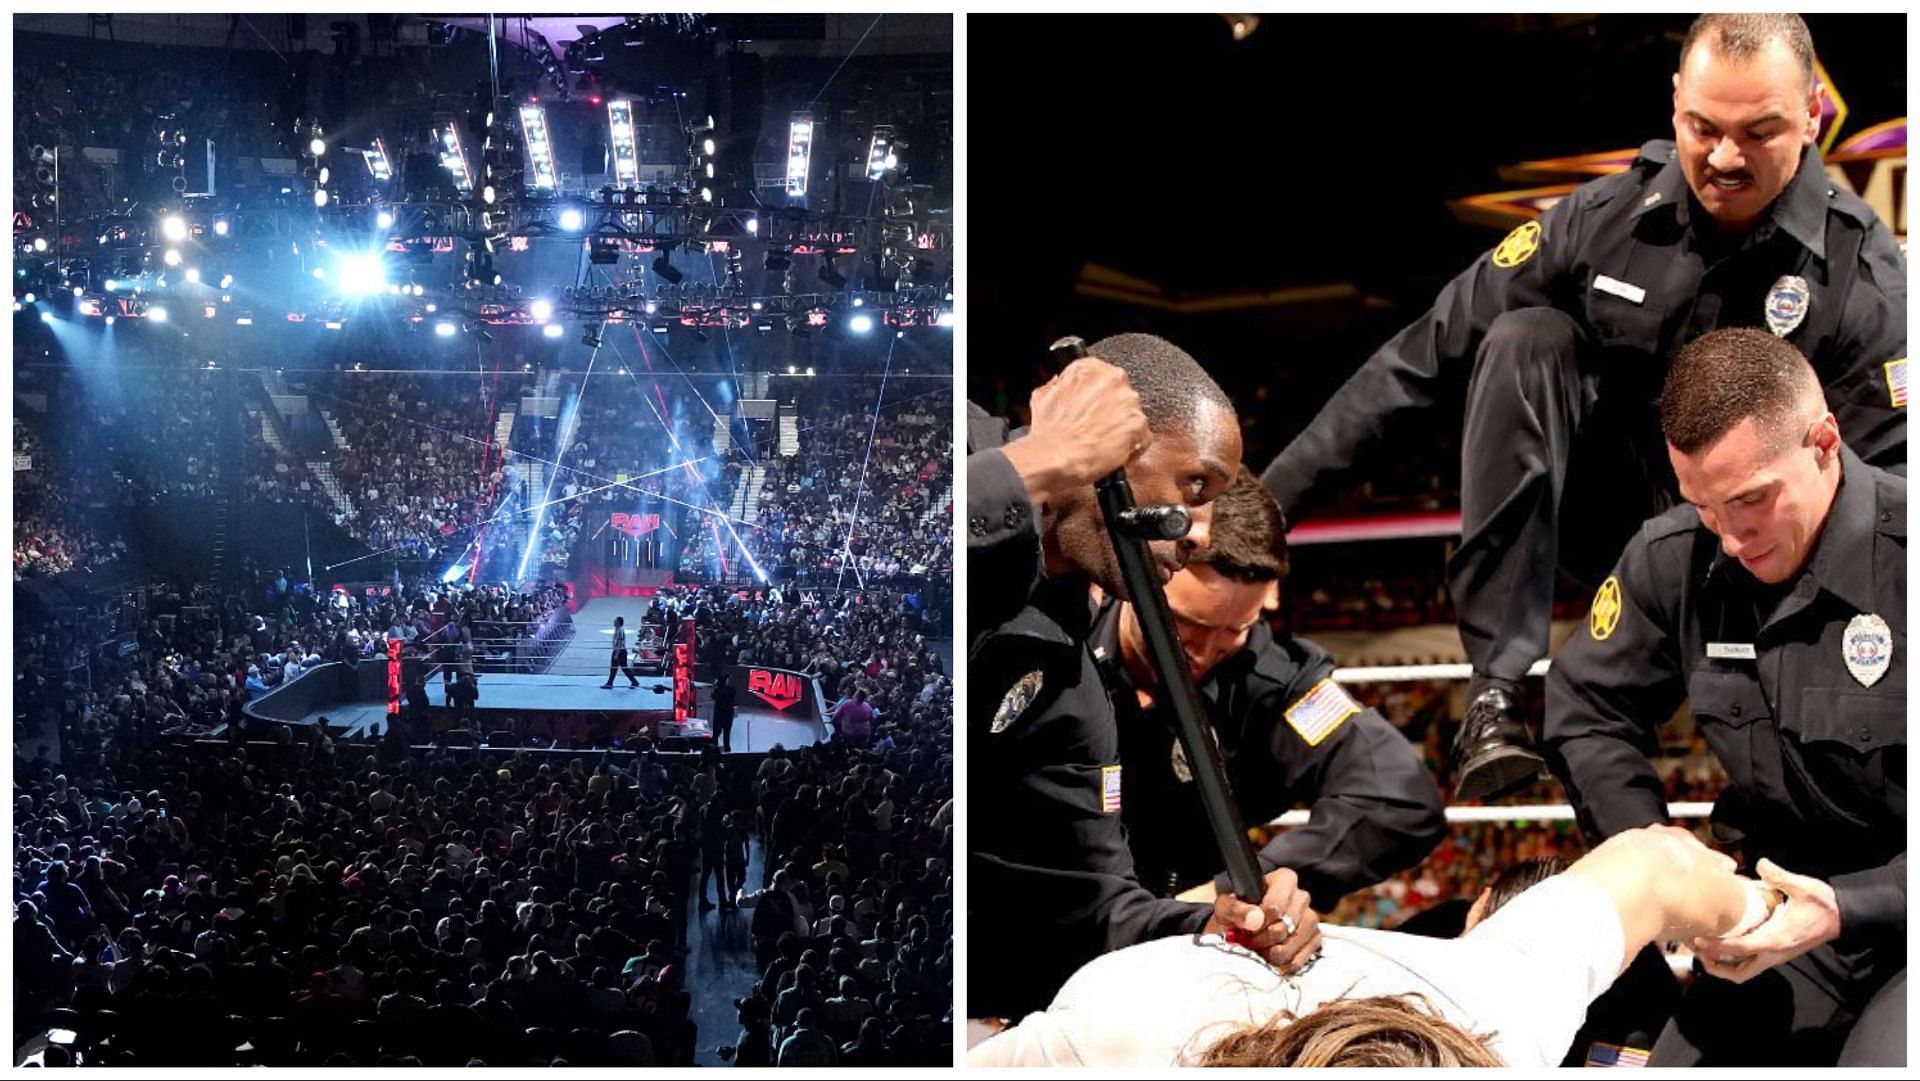 WWE Universe packs arena for RAW, Police arrest Daniel Bryan on RAW